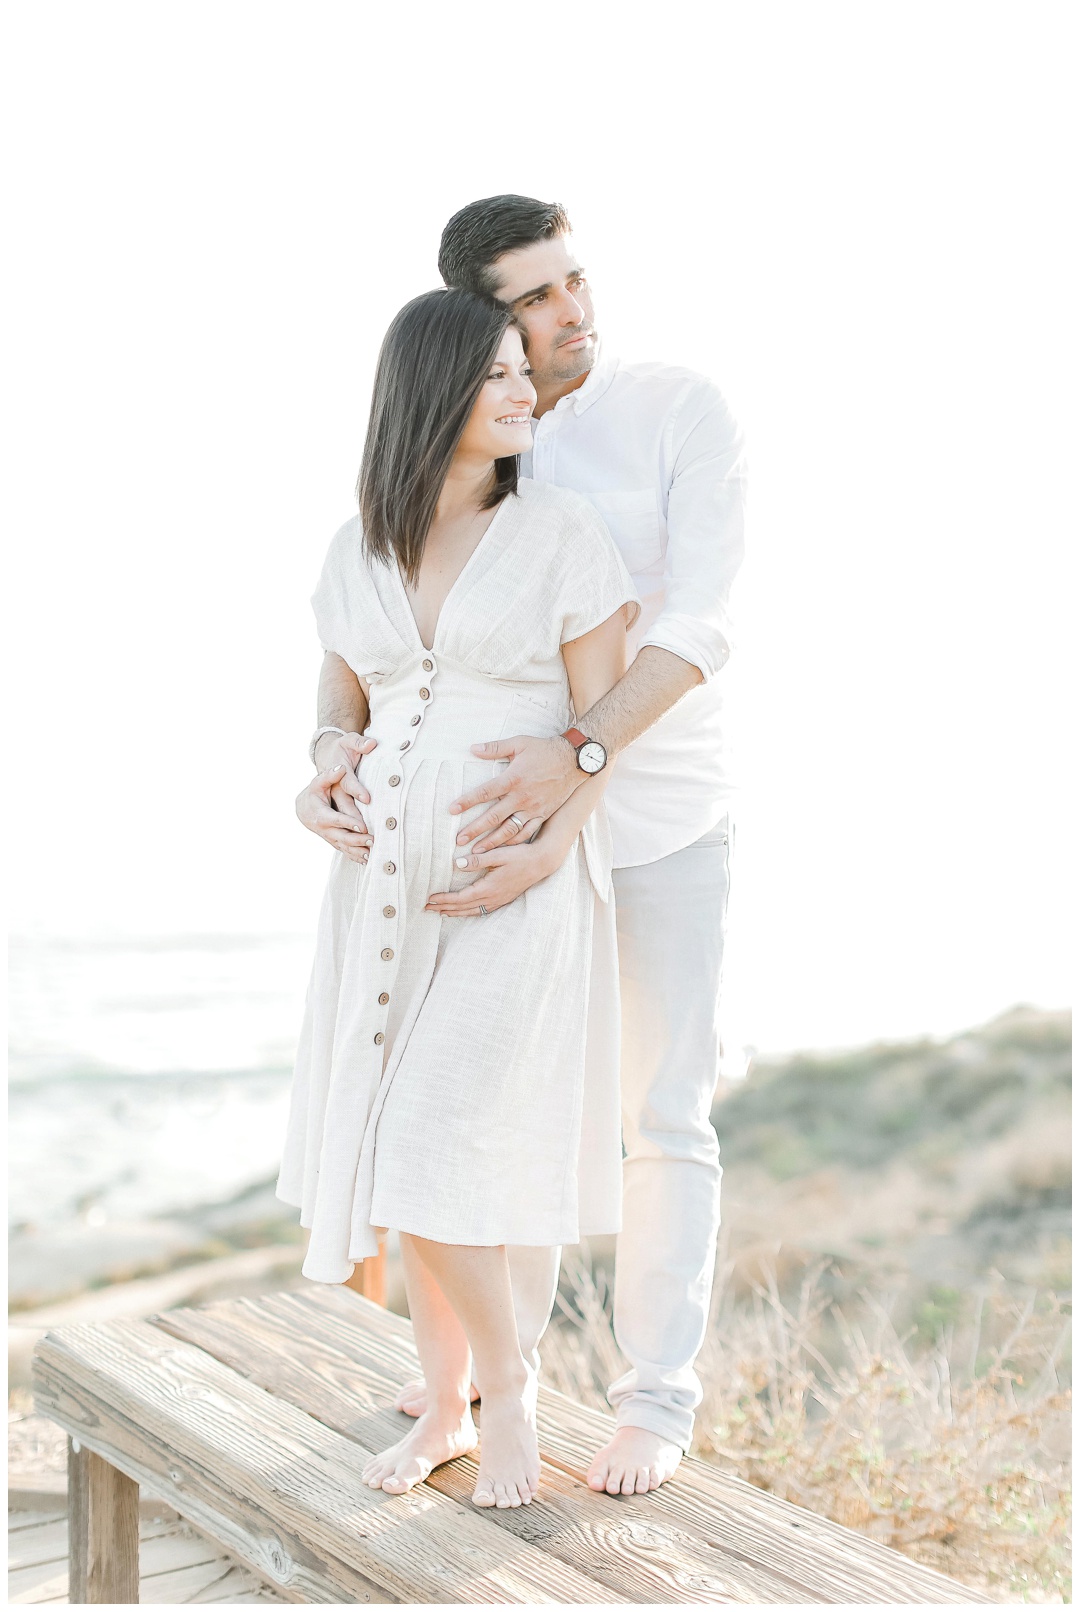 Crystal-Cove-State-Beach-Maternity-Session-Crystal-Cove-Newport-Beach-Maternity-Photographer-Crystal-Cove-Session-Cori-Kleckner-Photography-Orange-County-Maternity-Family-Photos-Session-_0904.jpg